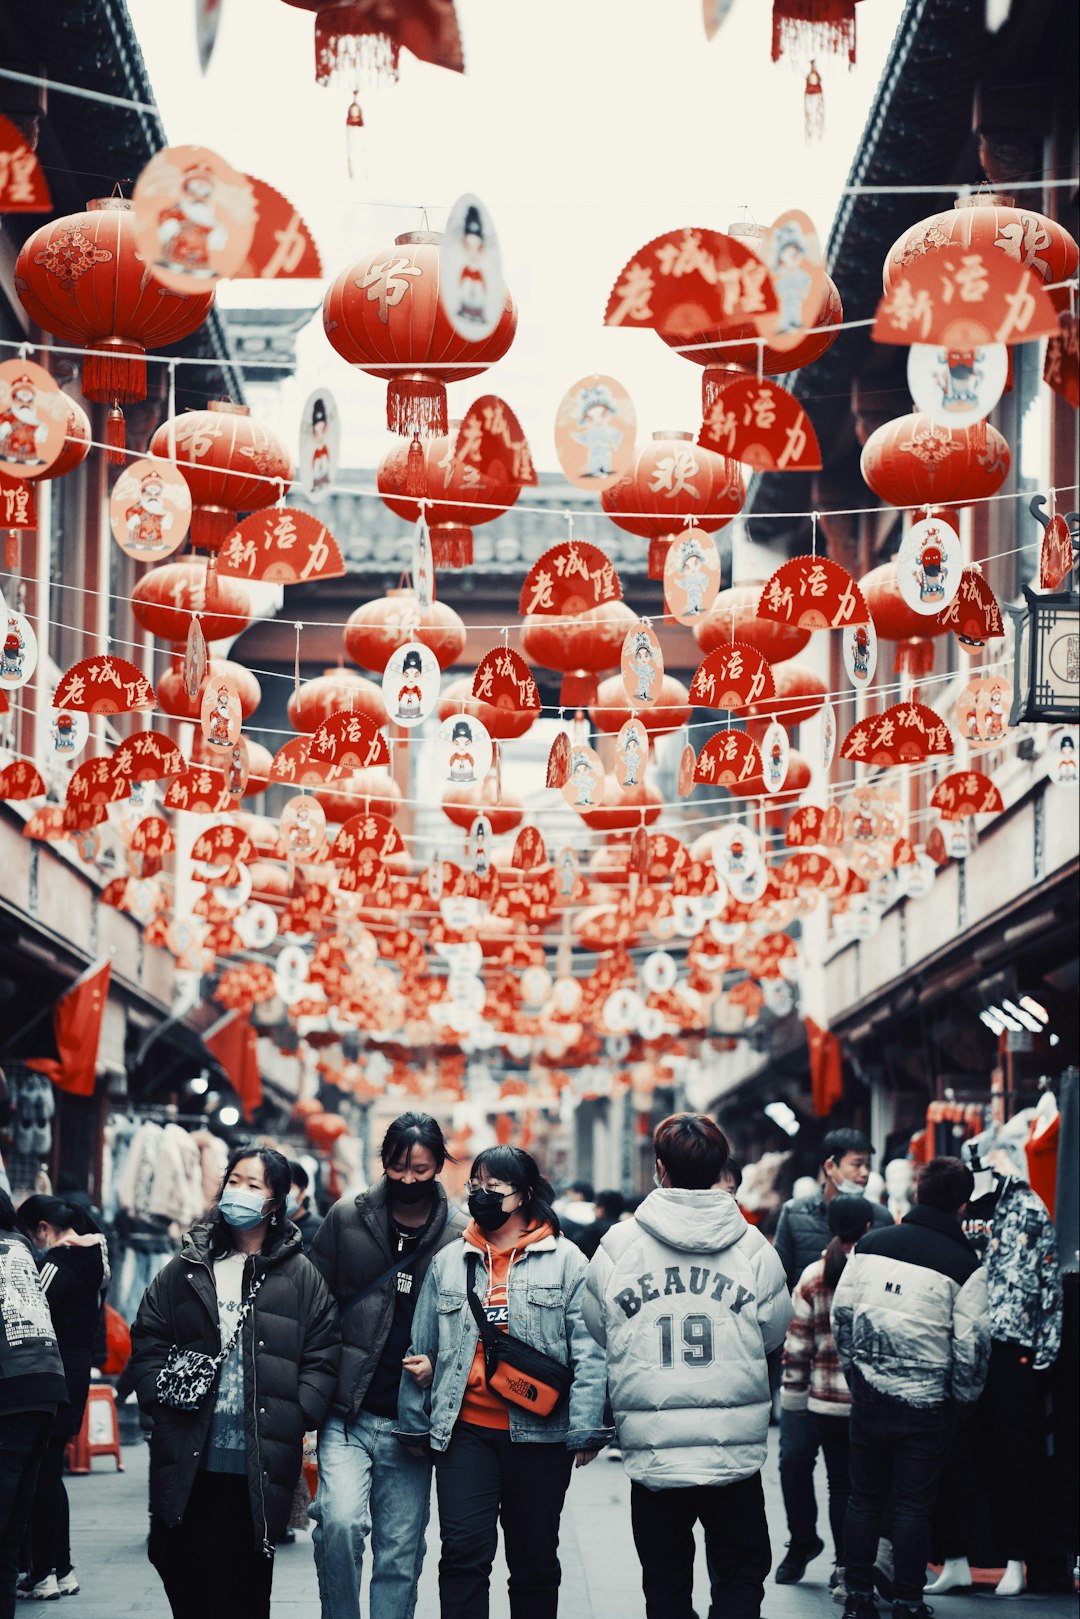 people in black and white shirts standing on red and white hanging lanterns